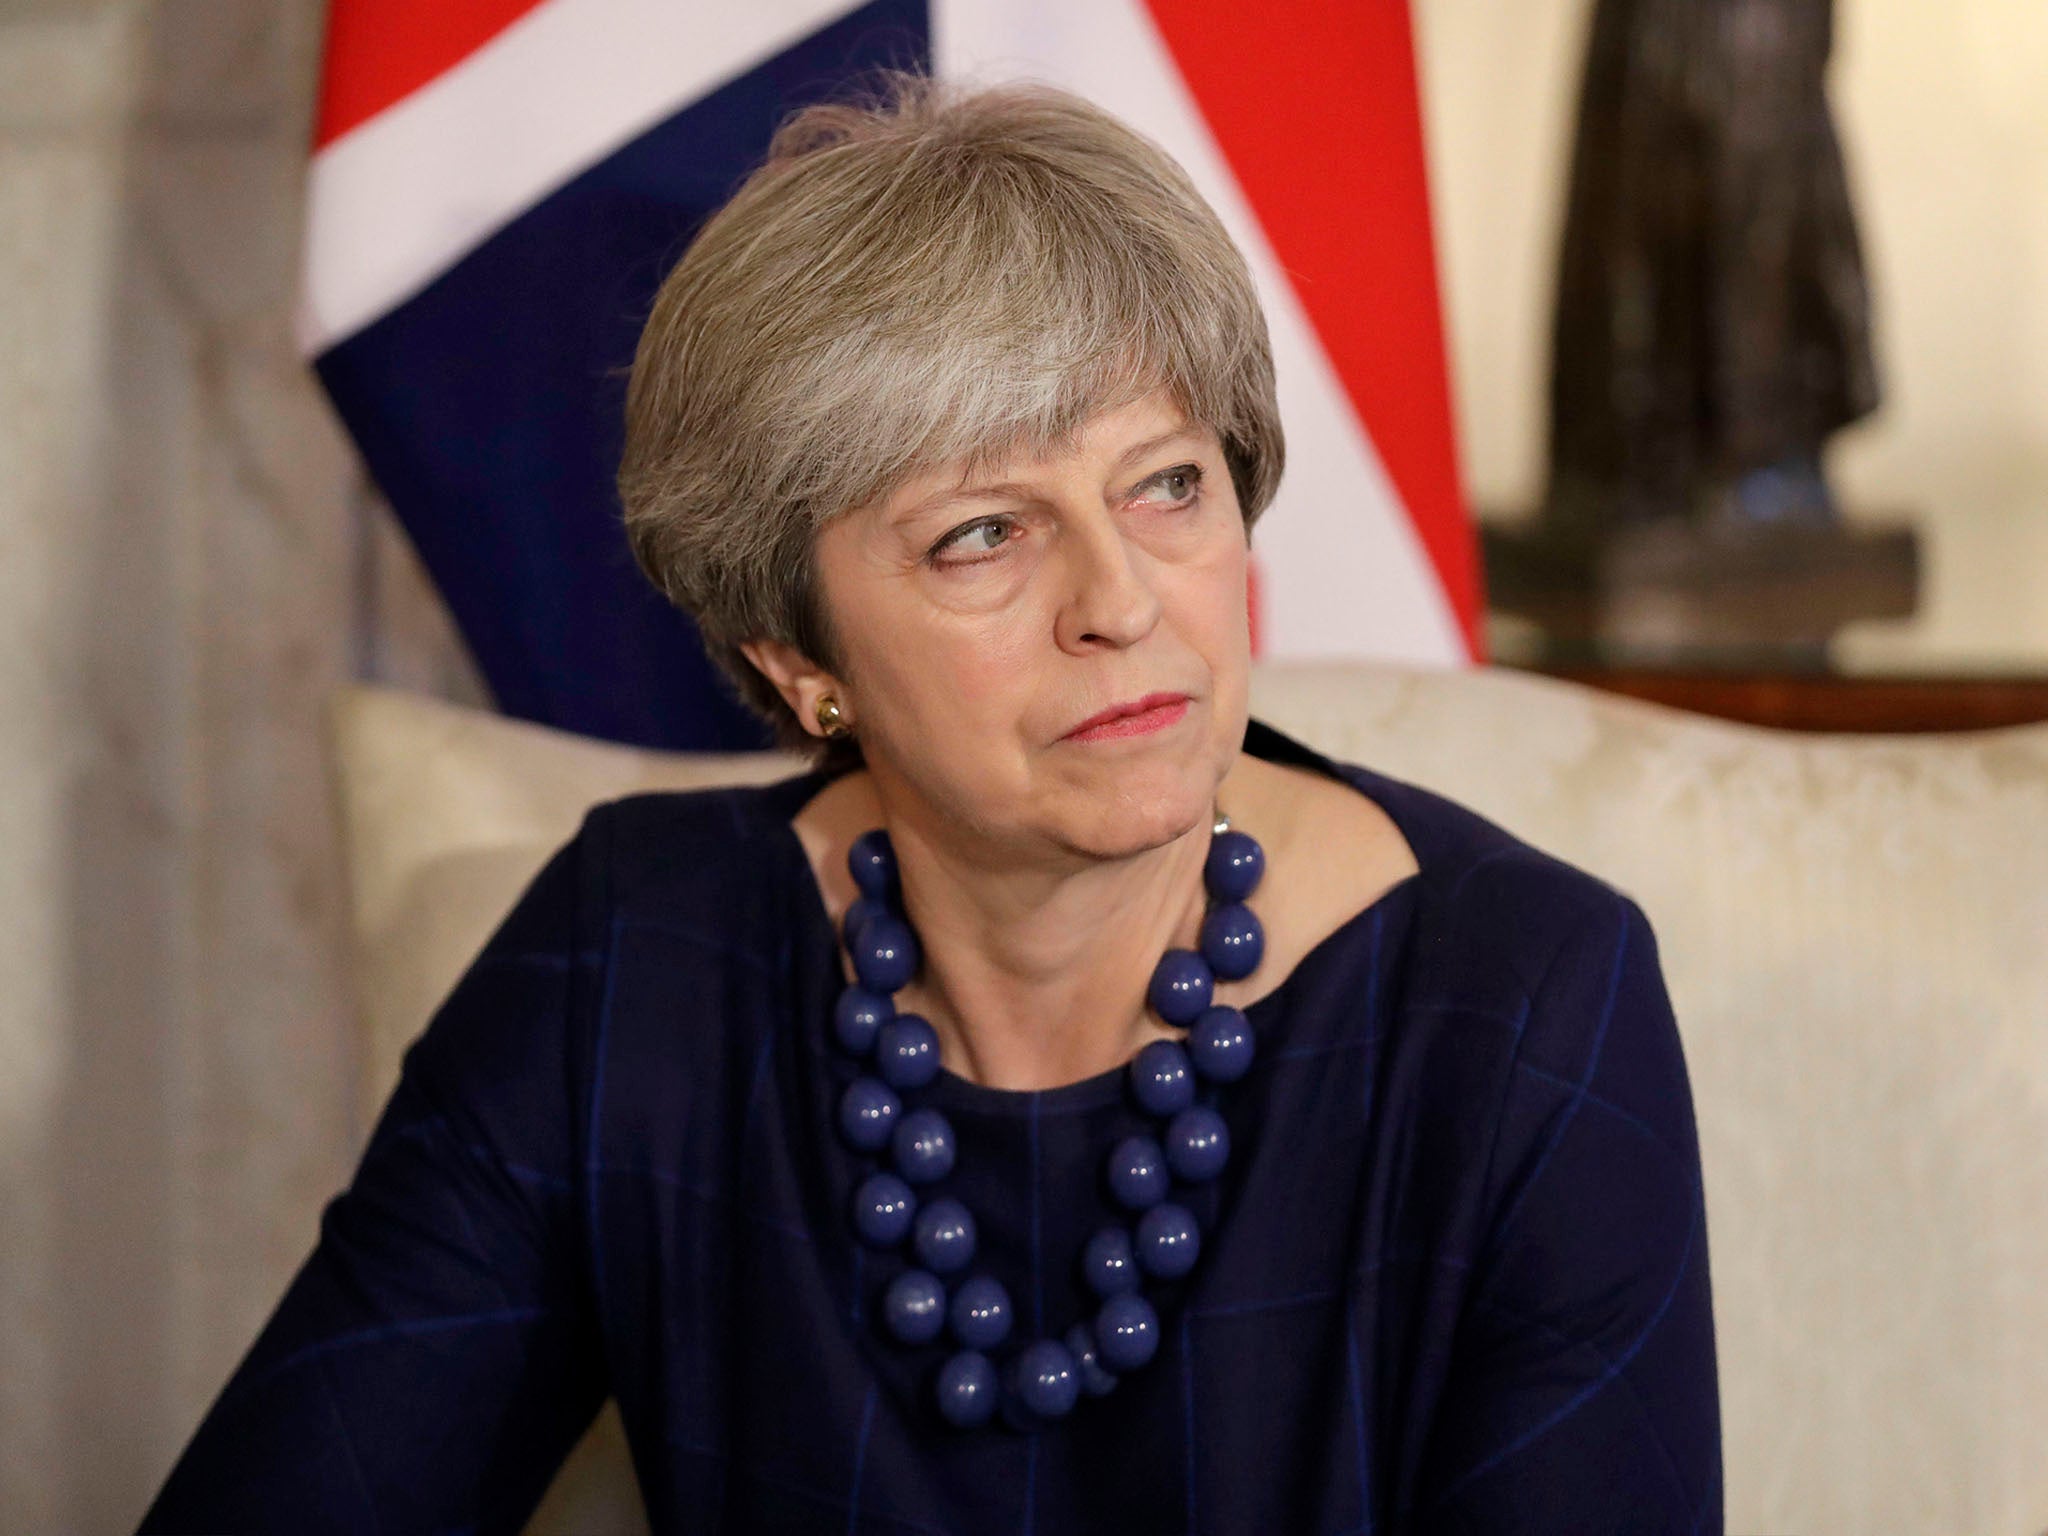 Talks on the UK’s future relationship with the EU will not start in earnest until next spring despite Theresa May’s breakthrough last week, amid concern that the UK hasn’t made up its mind